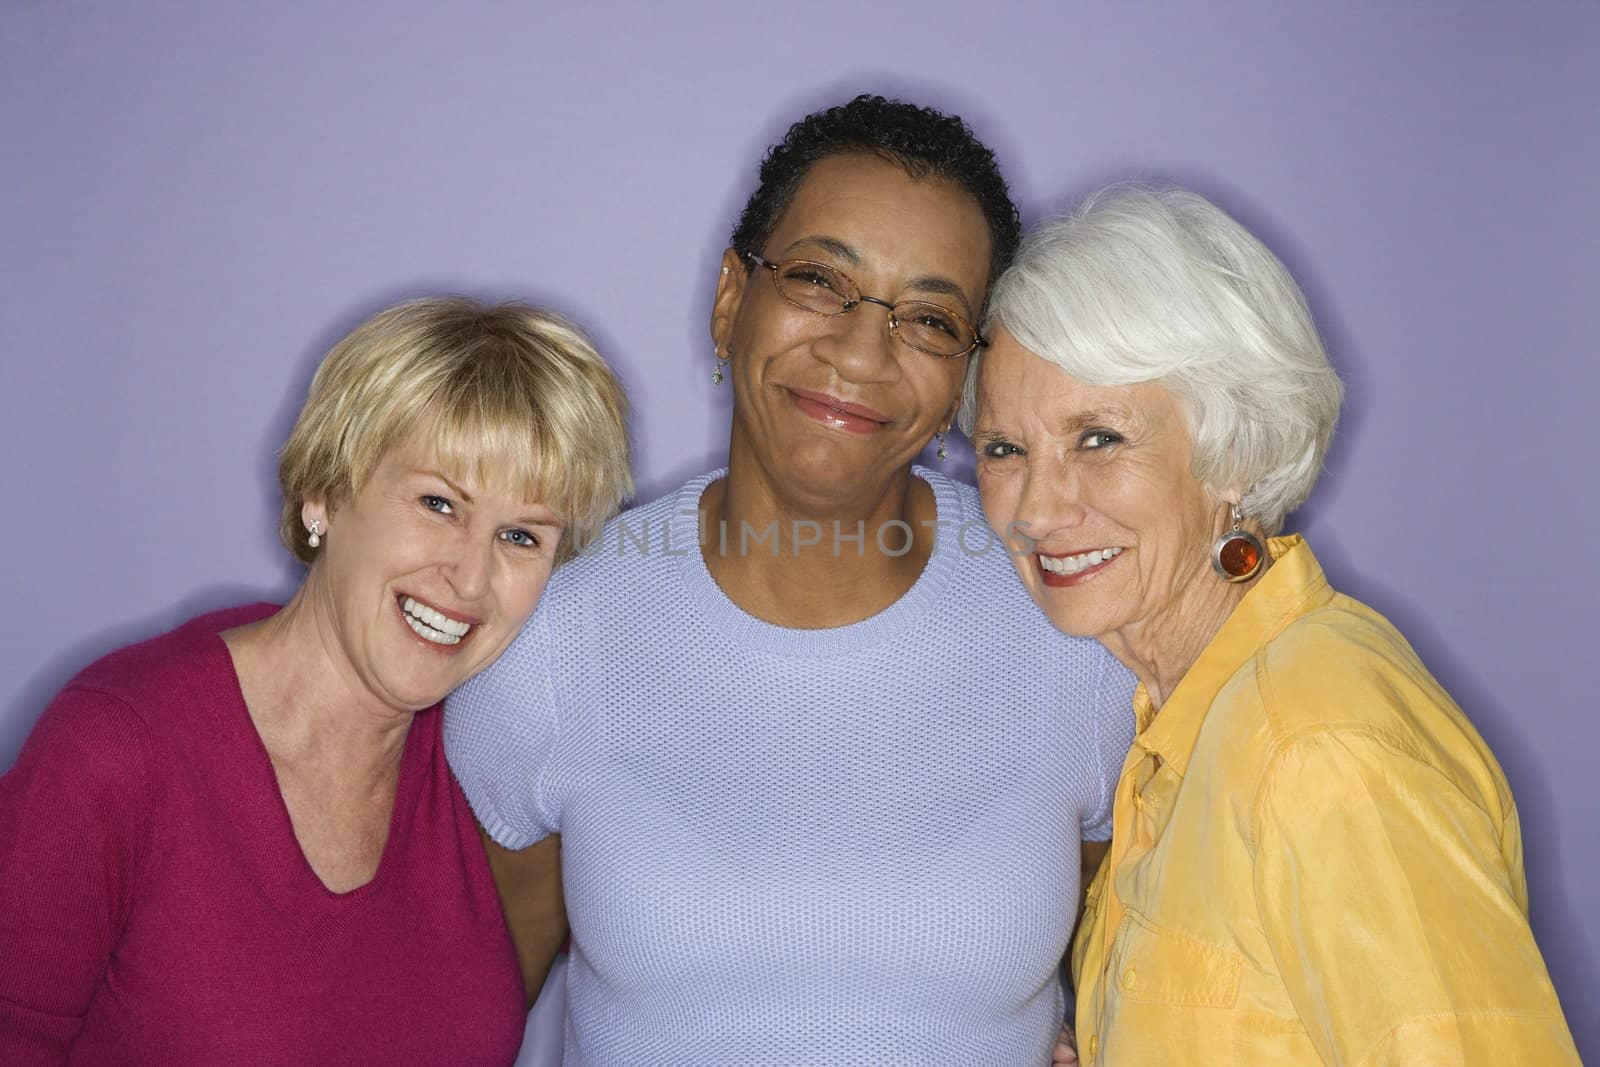 Portrait of Caucasian and African American mature adult females.